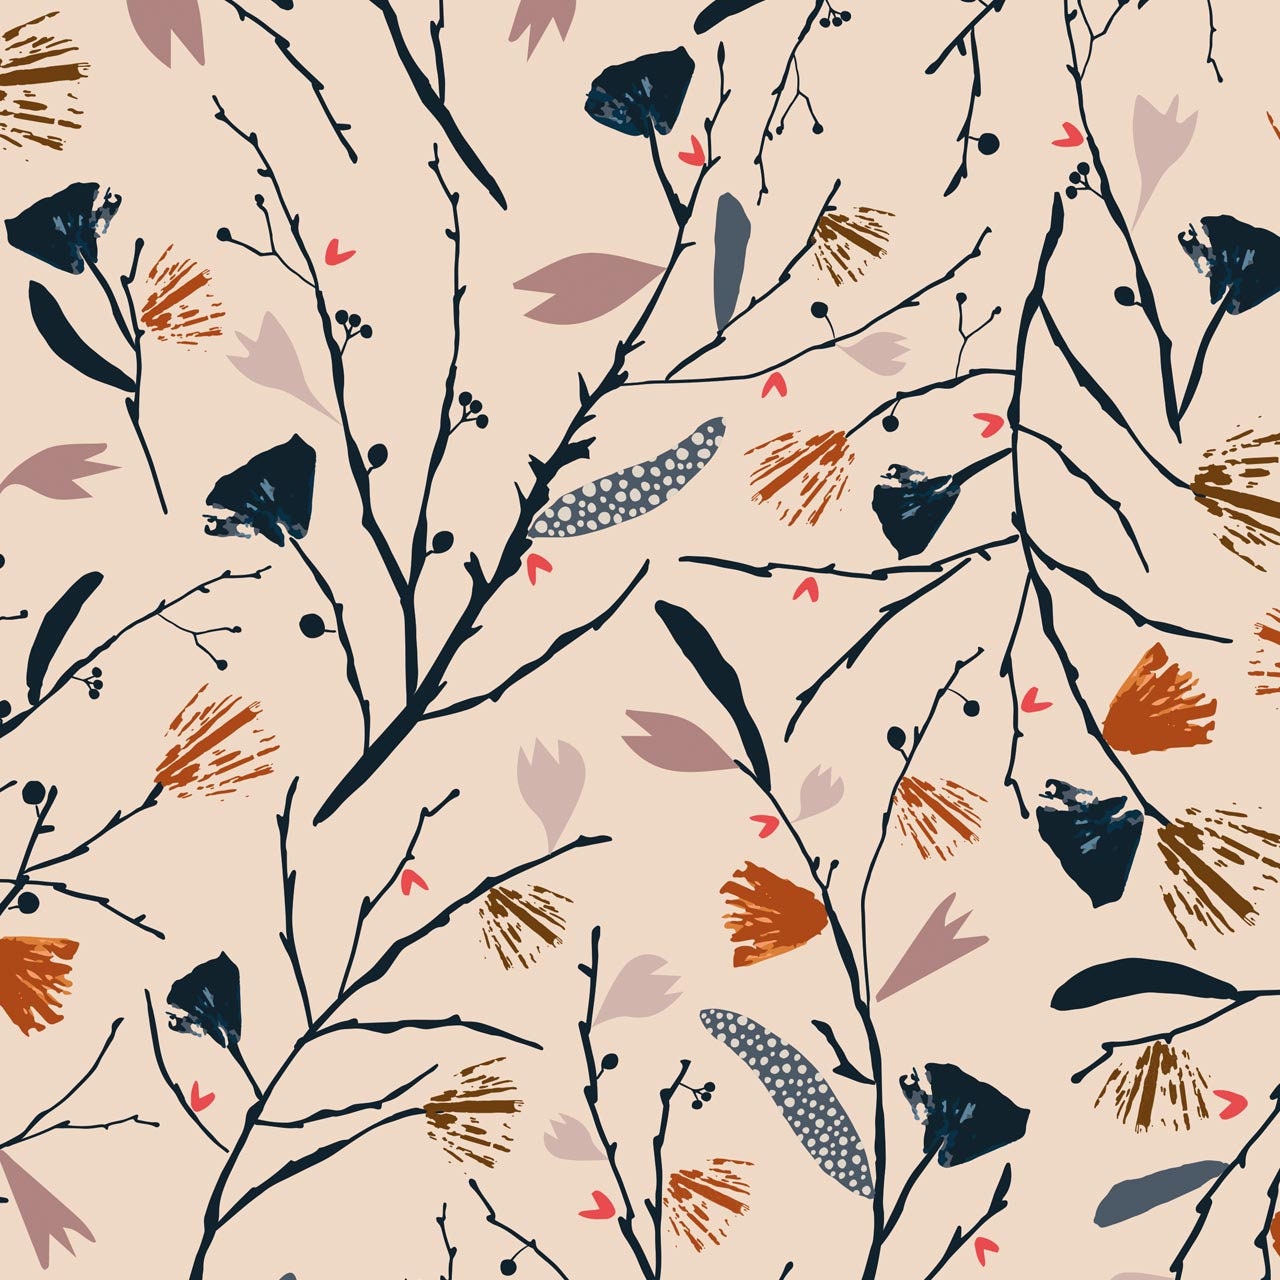 Navy and rust autumnal plants on cram cotton fabric - Woodland notions by Dahswood Studio